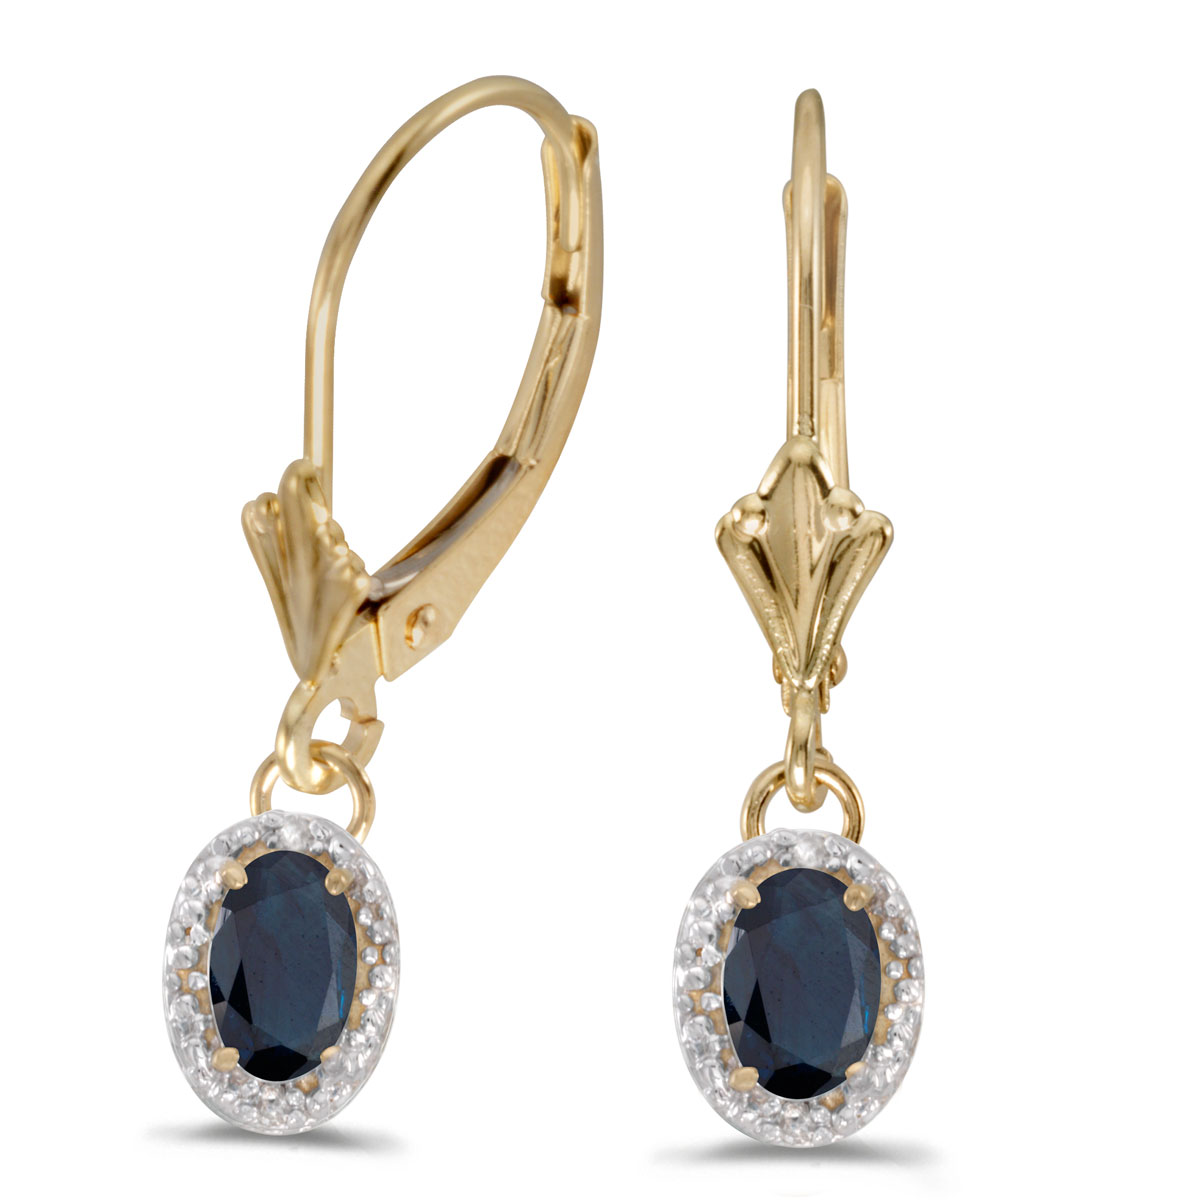 JCX2116: Beautiful 10k yellow gold leverback earrings with bold 6x4 mm sapphires complemented with bright diamonds.